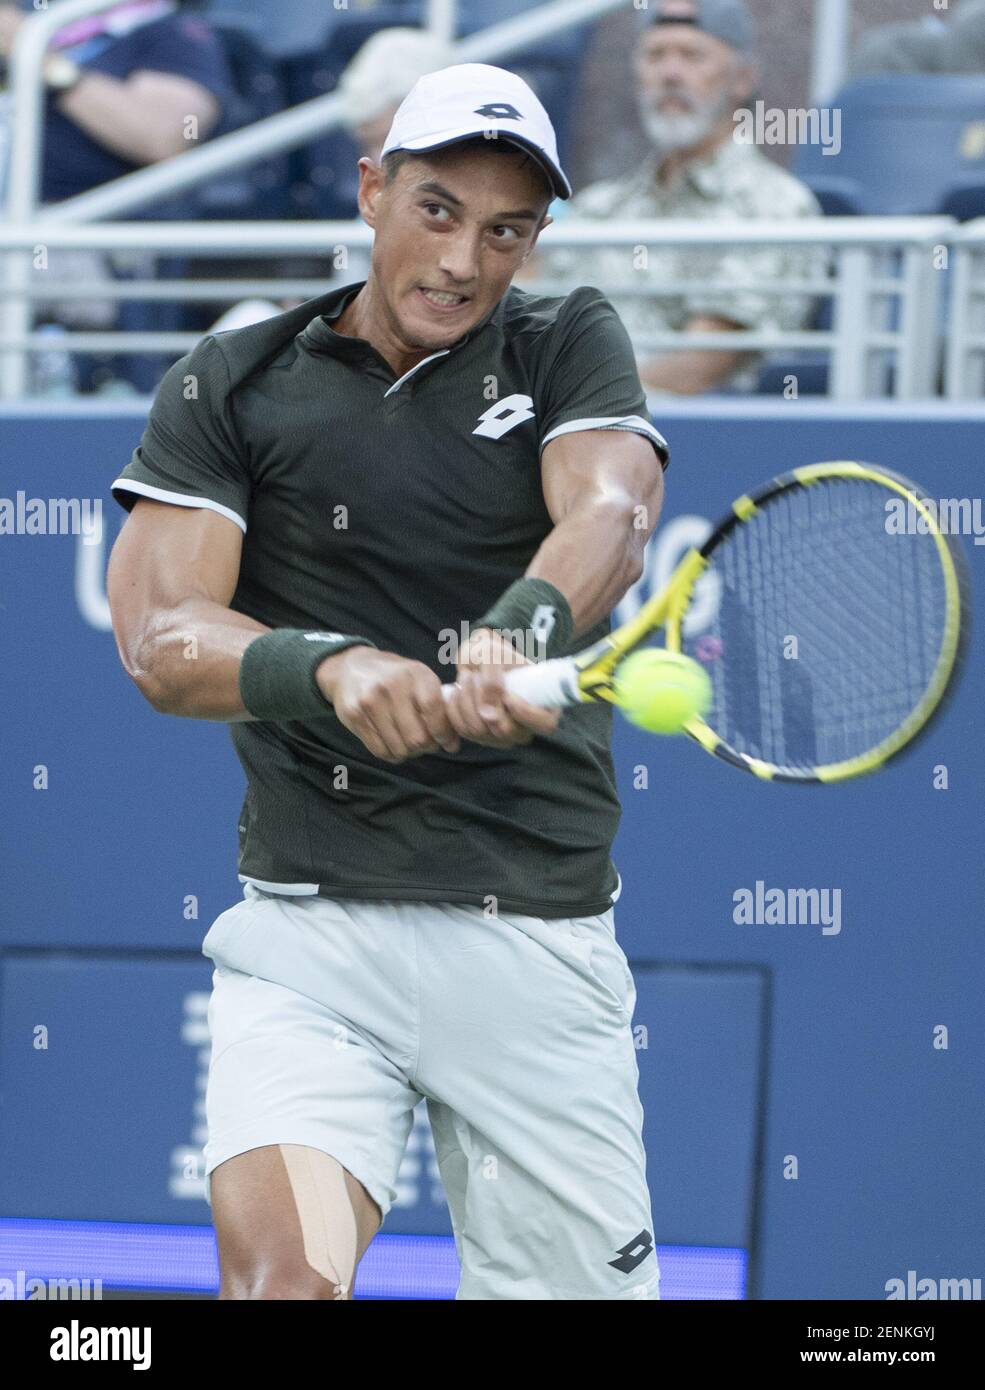 August 29, 2019: Antoine Hoang (FRA) loses to Nick Kyrgios (AUS) 6-4, 6-2,  at the US Open being played at Billie Jean King National Tennis Center in  Flushing, Queens, NY. © Jo